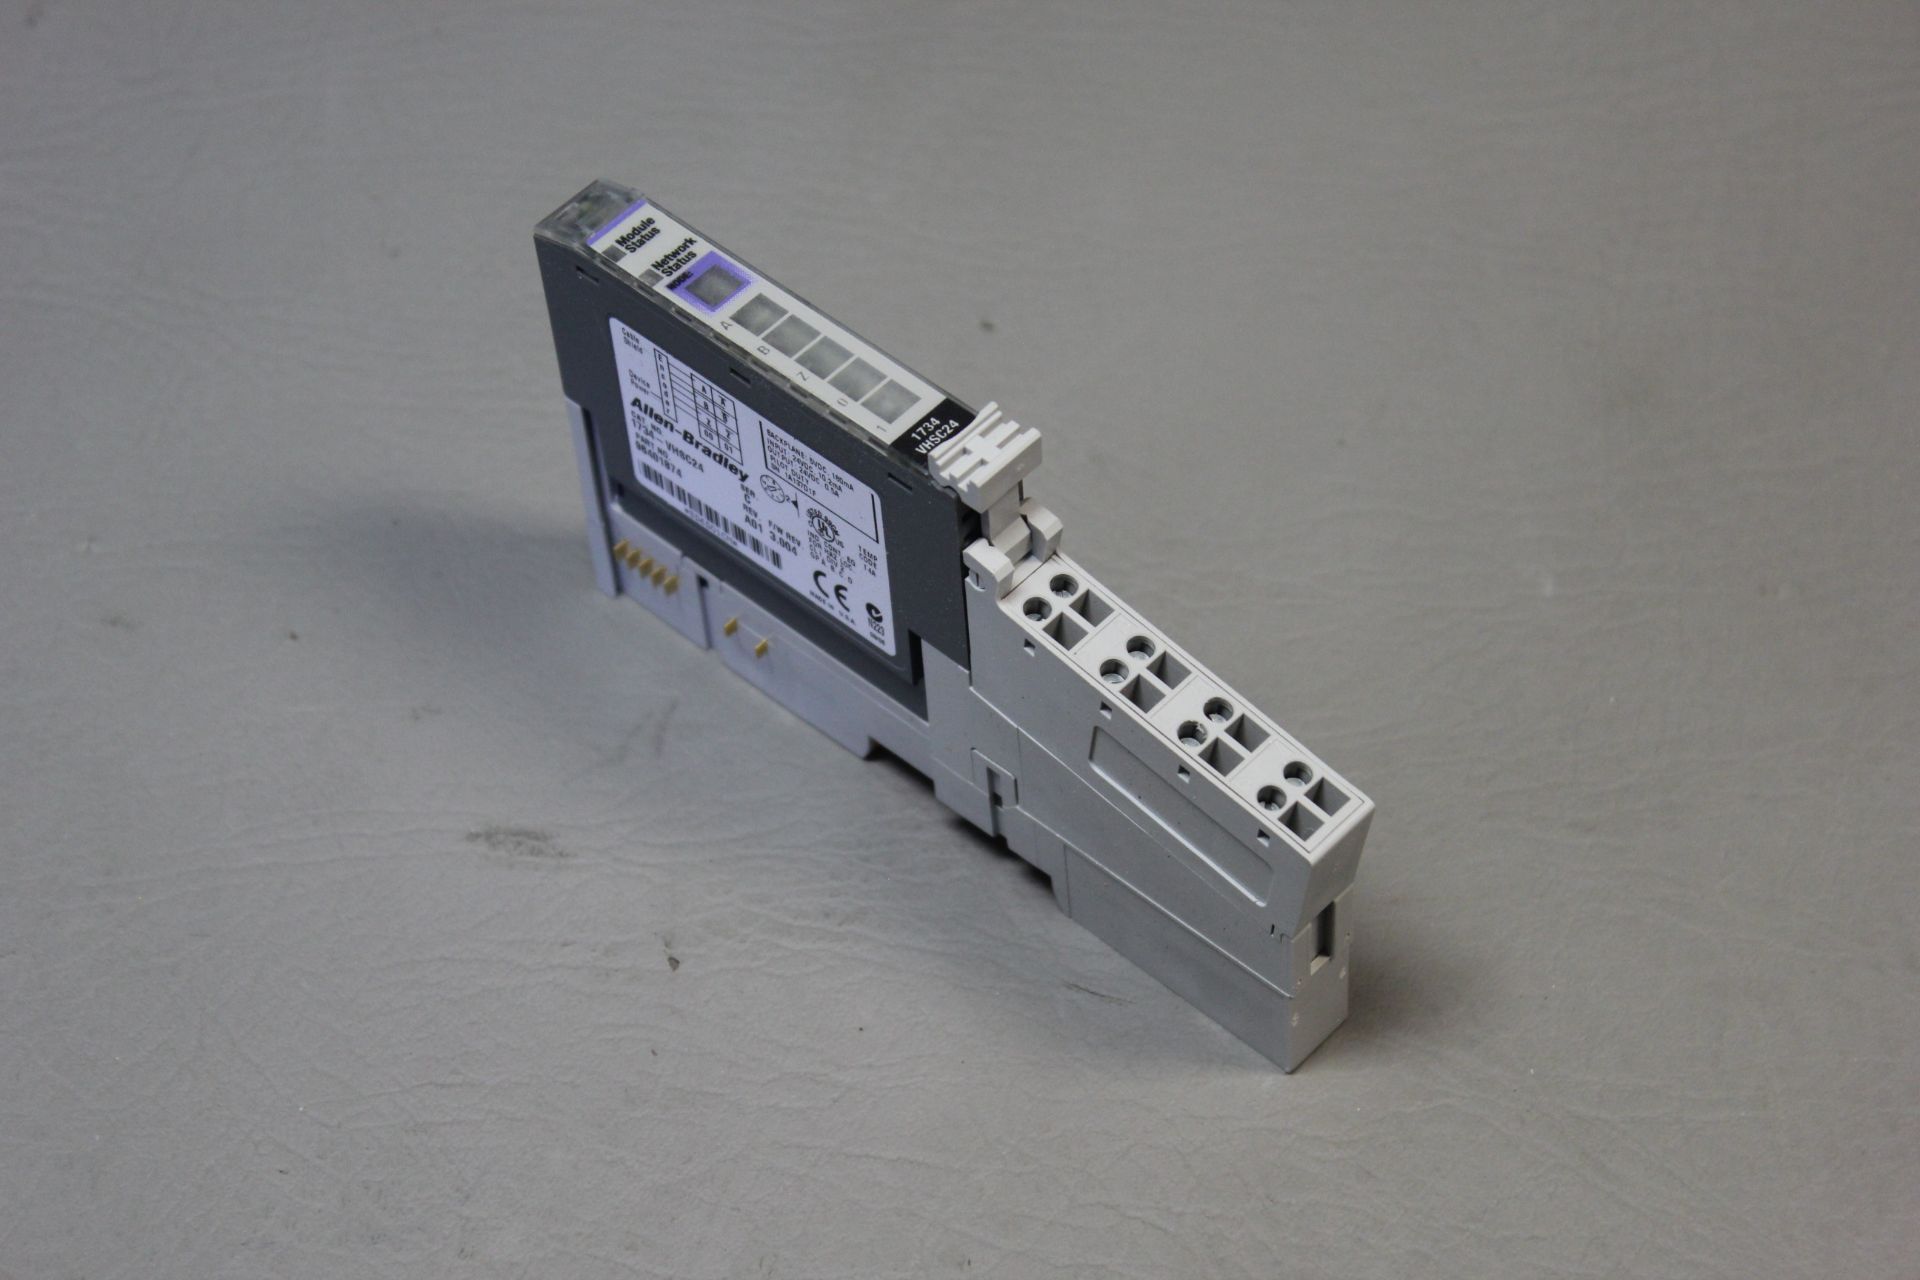 ALLEN BRADLEY VERY HIGH SPEED COUNTER MODULE SET WITH BASES - Image 6 of 8